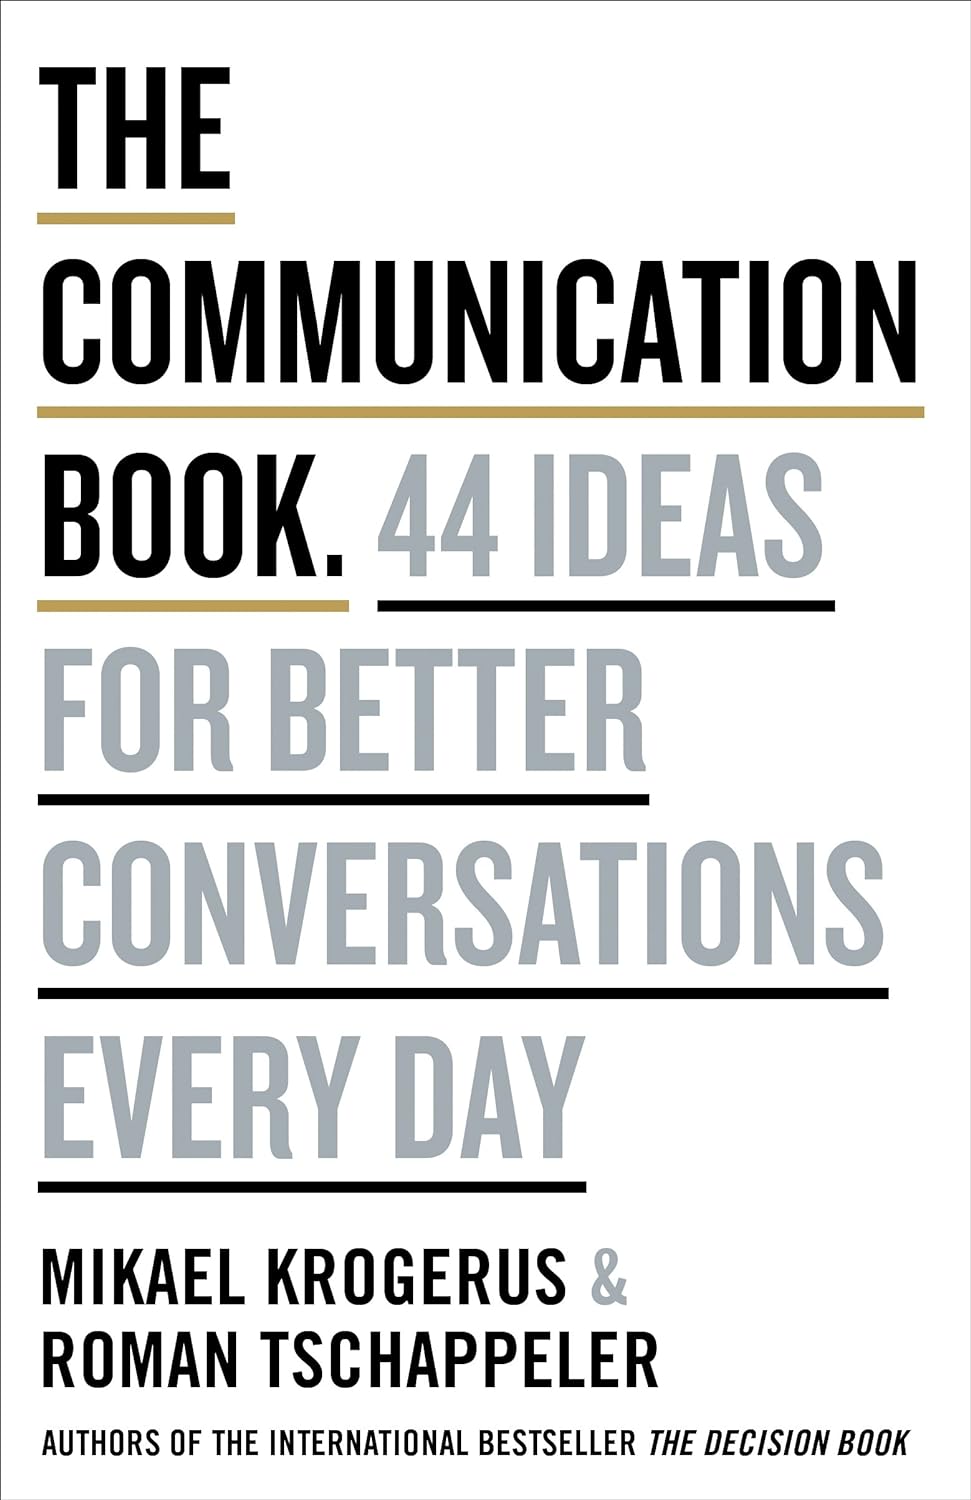 The Communication Book: 44 Ideas for Better Conversations Every Dayn by Mikael Krogerus